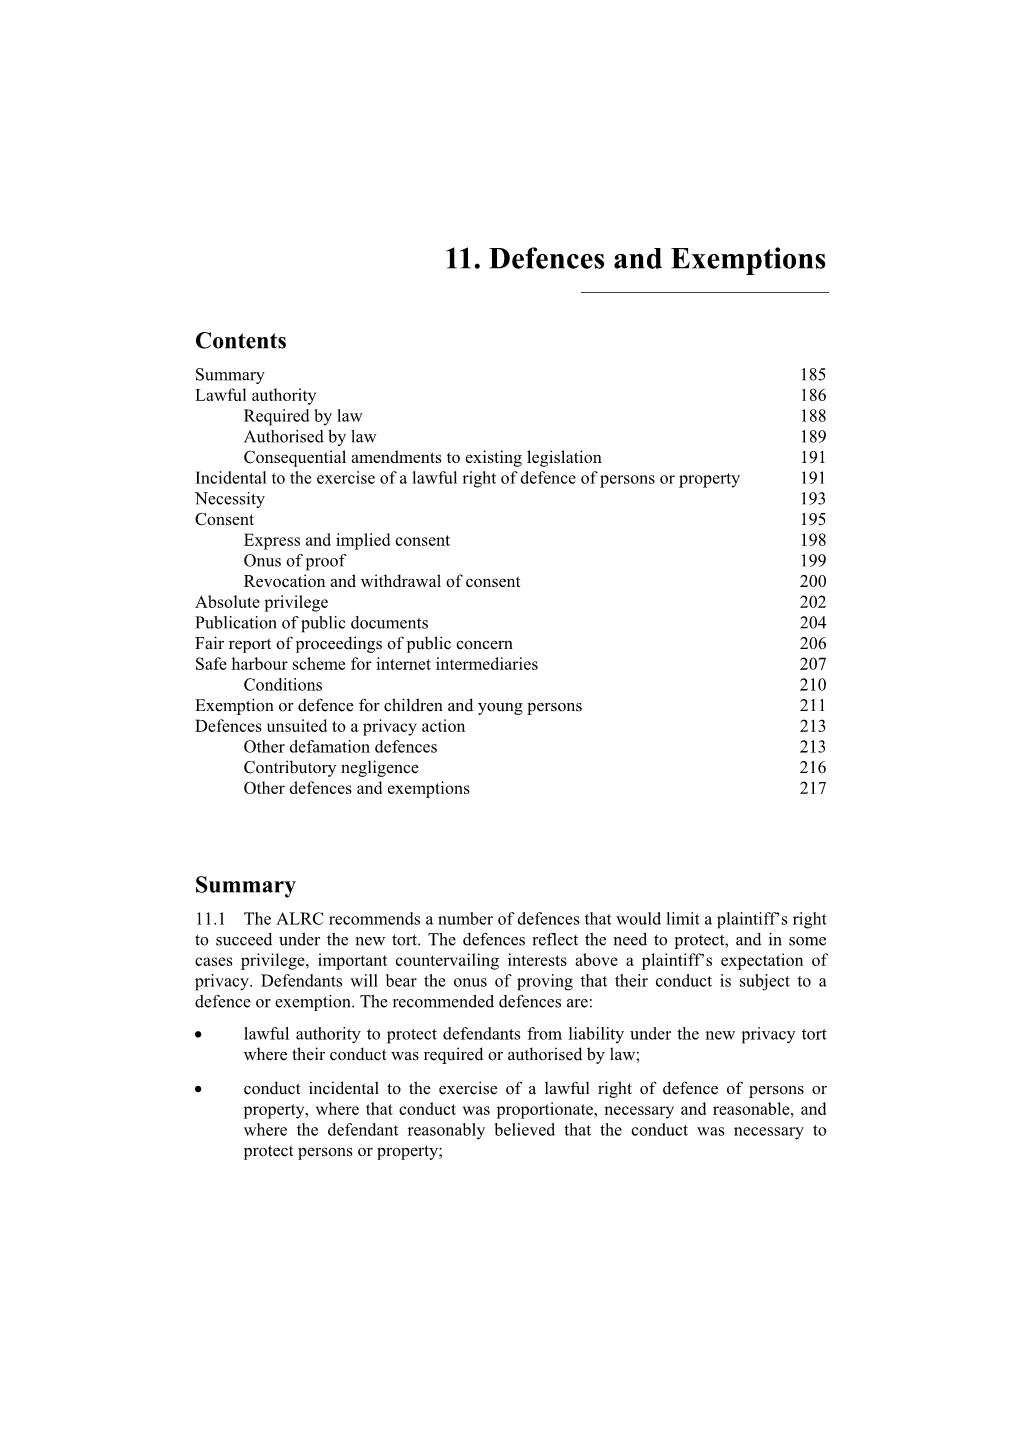 Defences and Exemptions In